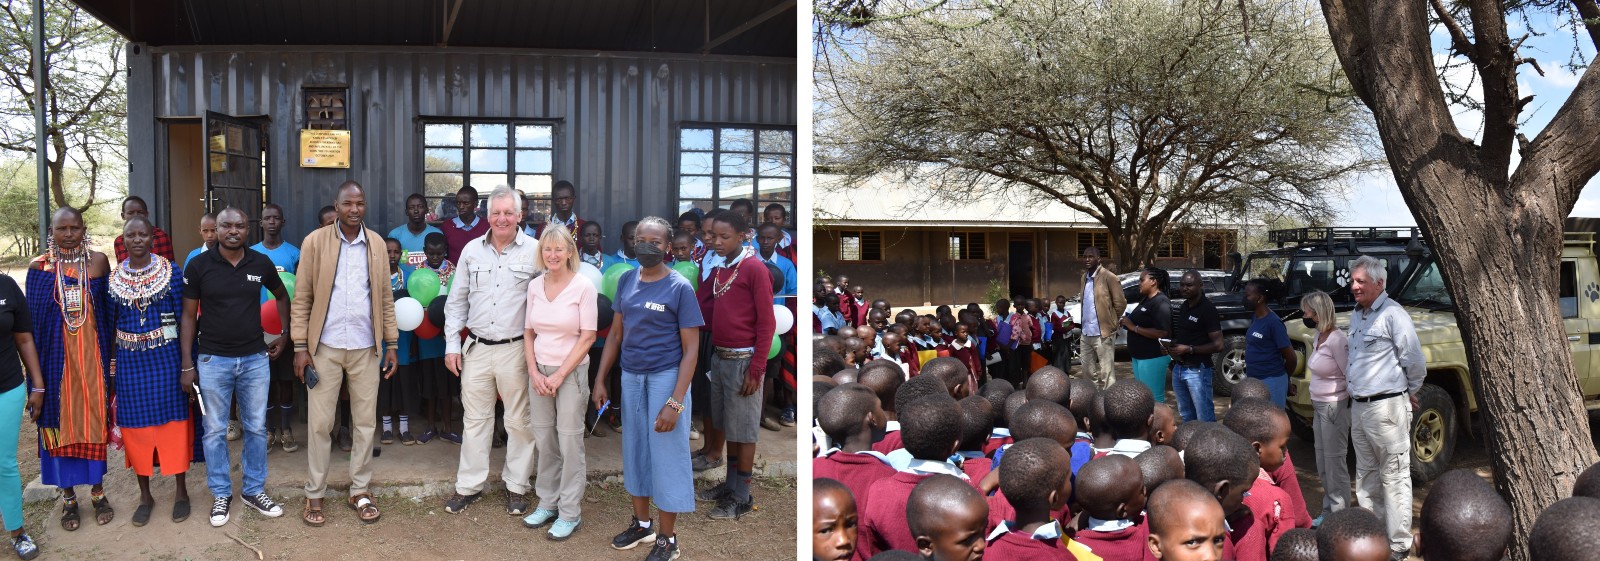 Two photos showing a school visit in Kenya